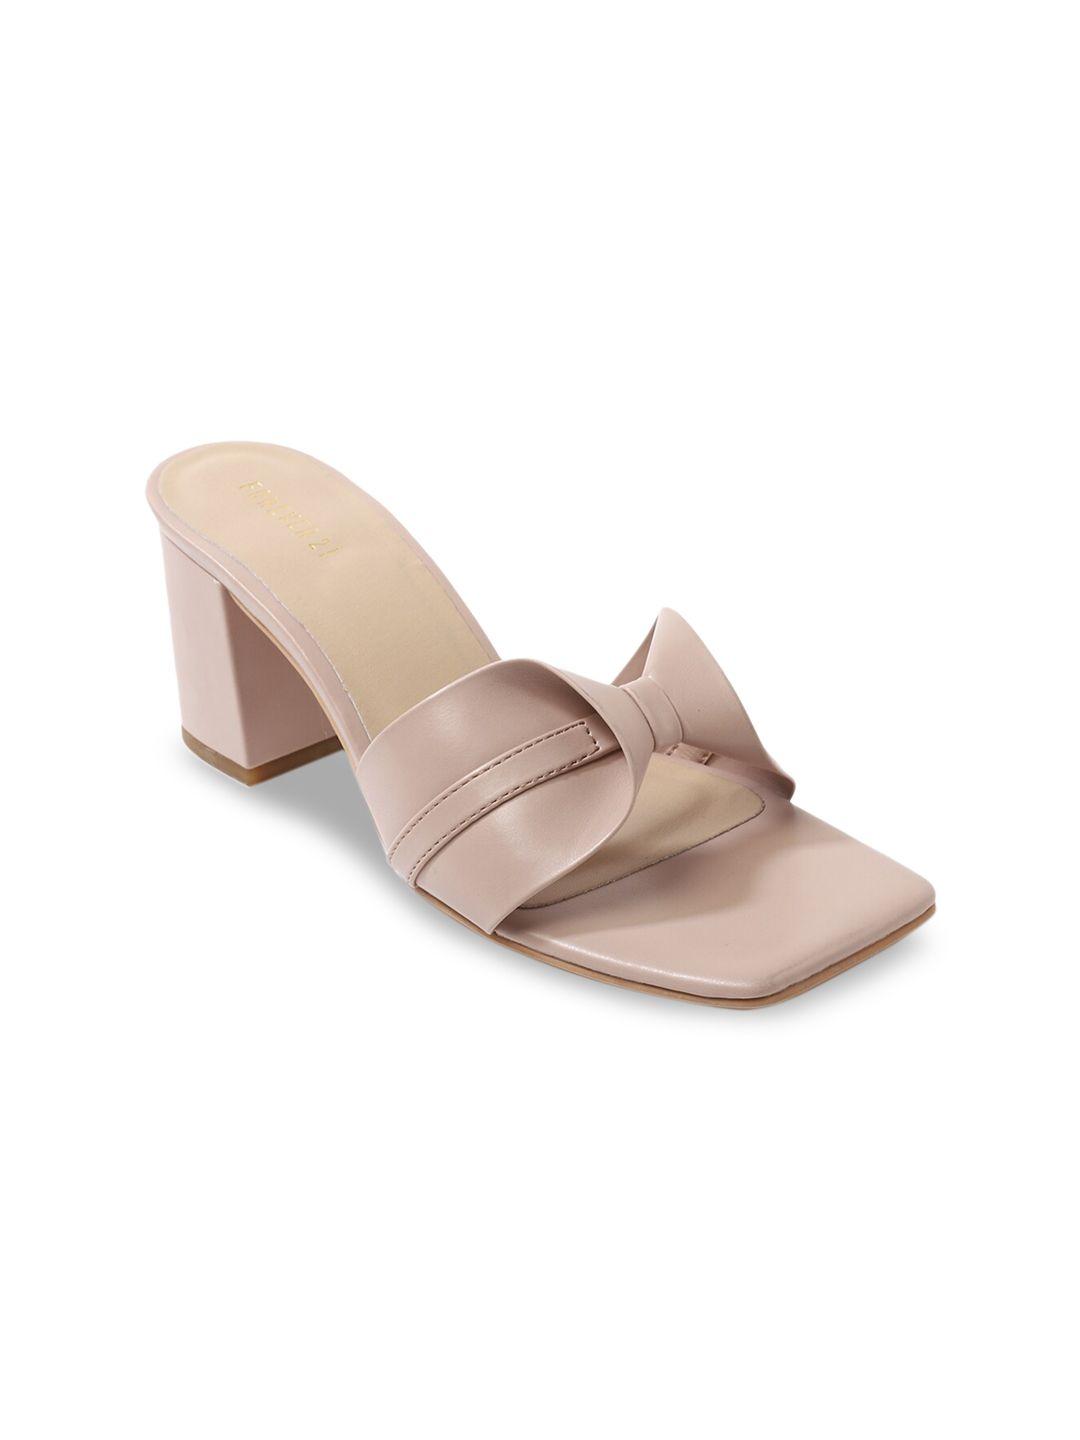 forever 21 pink pu block sandals with bows